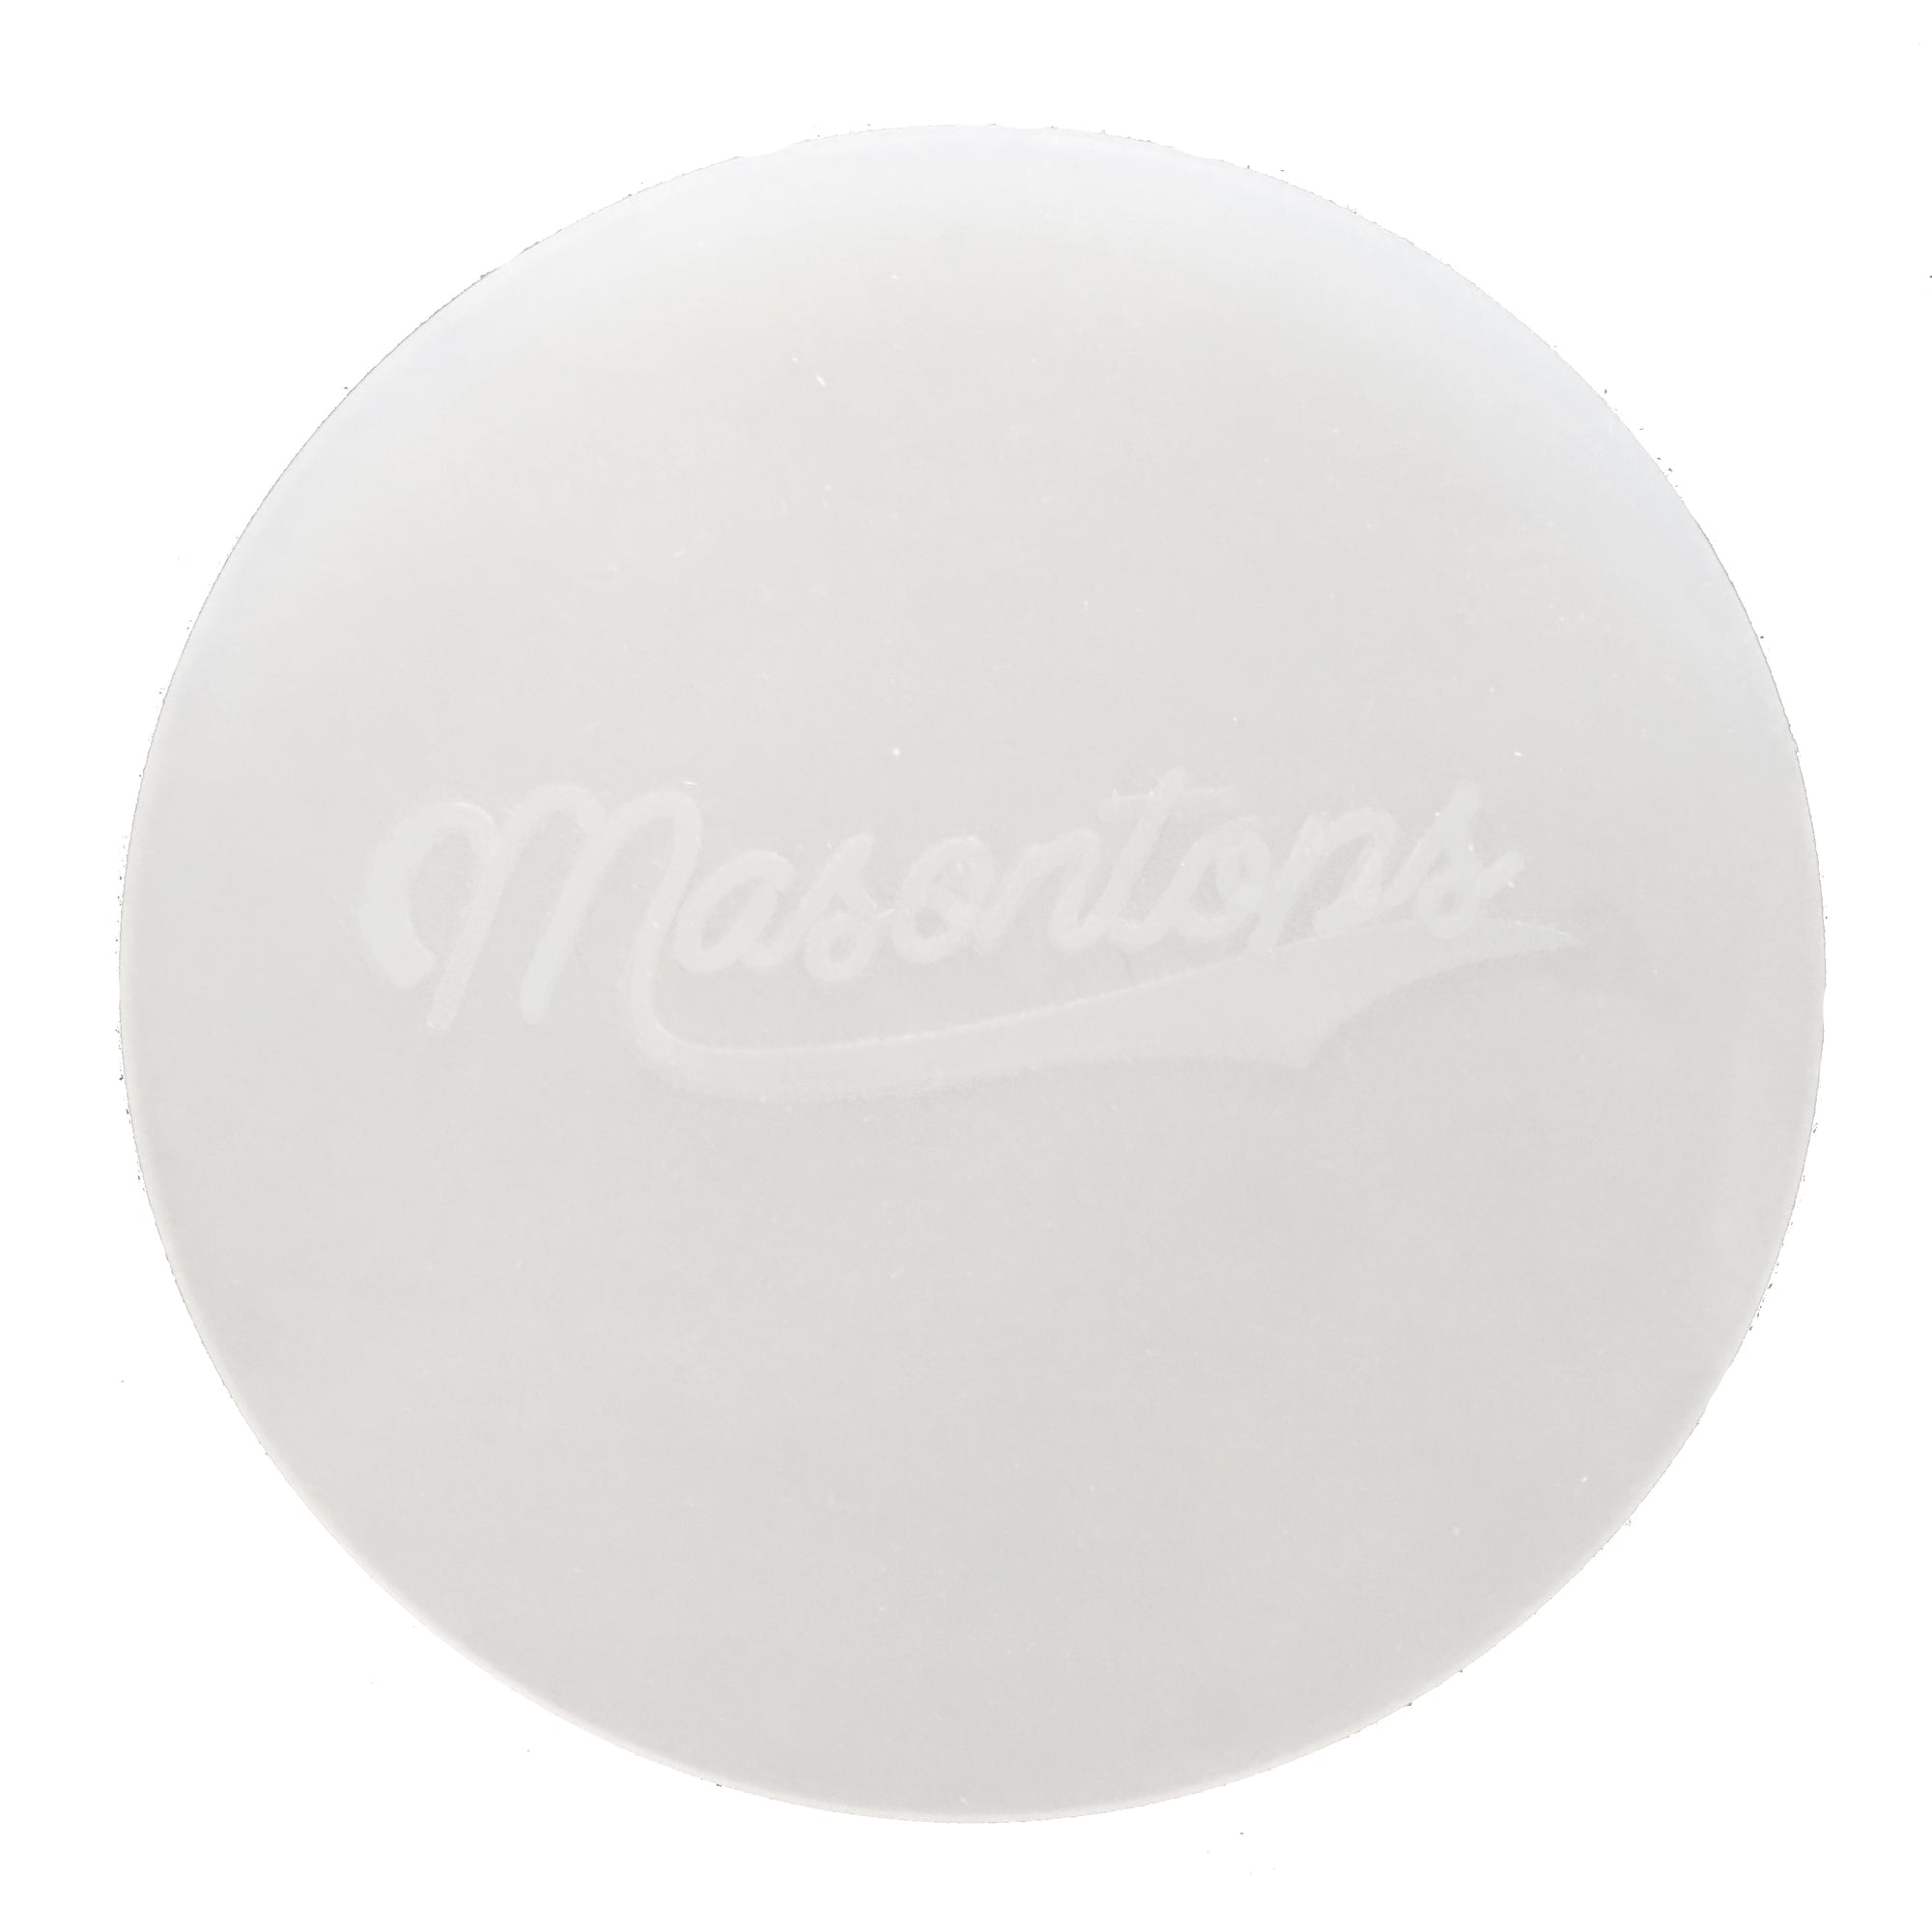 silicone disc on a white background